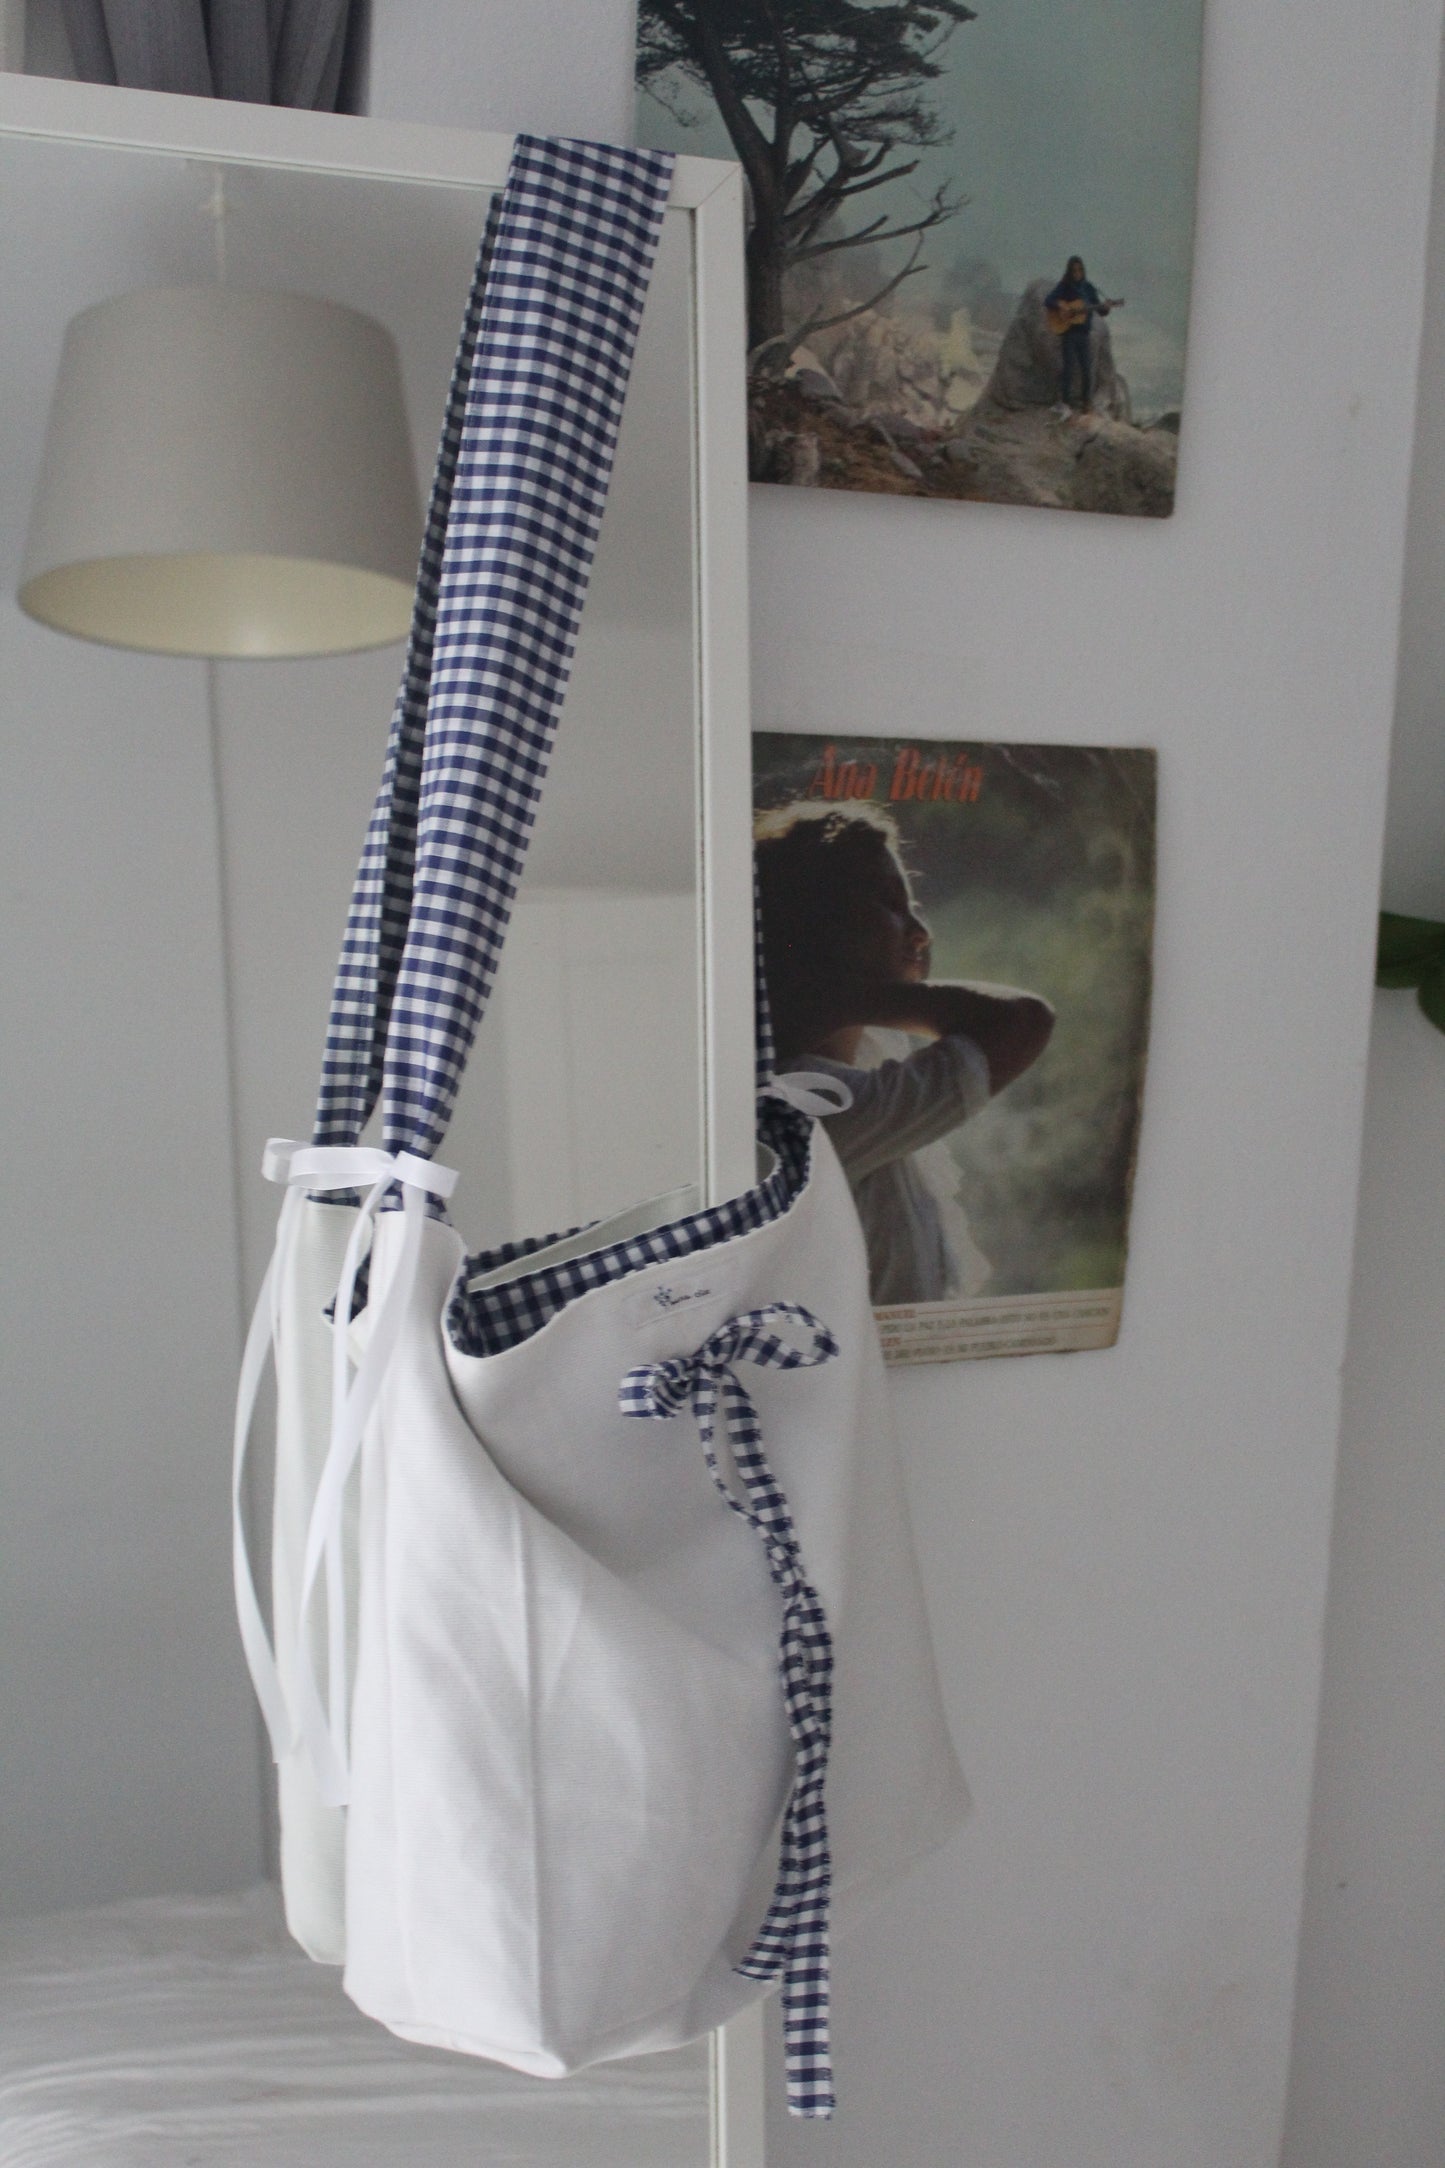 Reversible Blue Gingham Bow Tote Bag